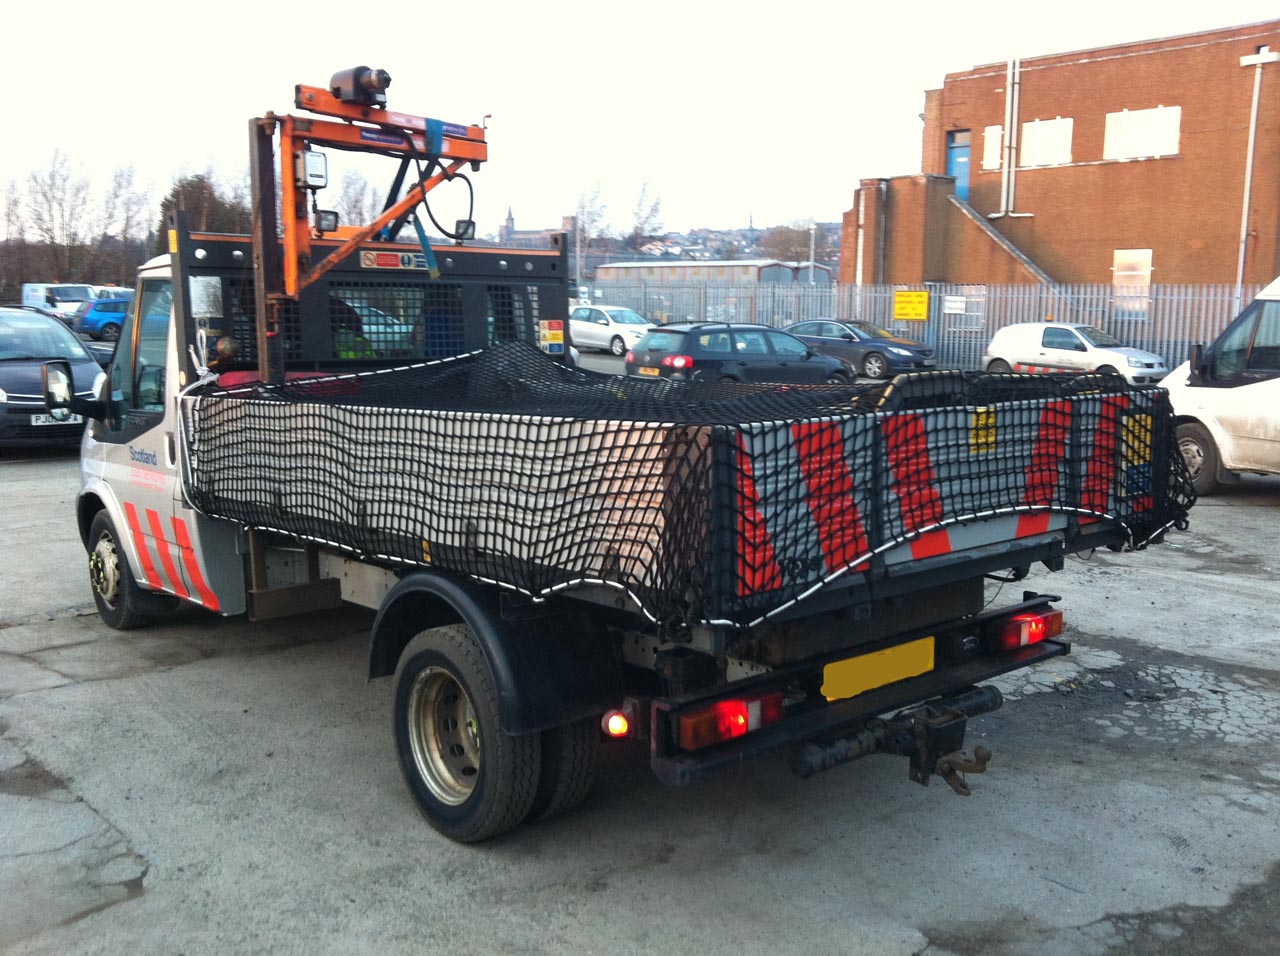 Cargo net covering a load on the back of a vehicle trailer